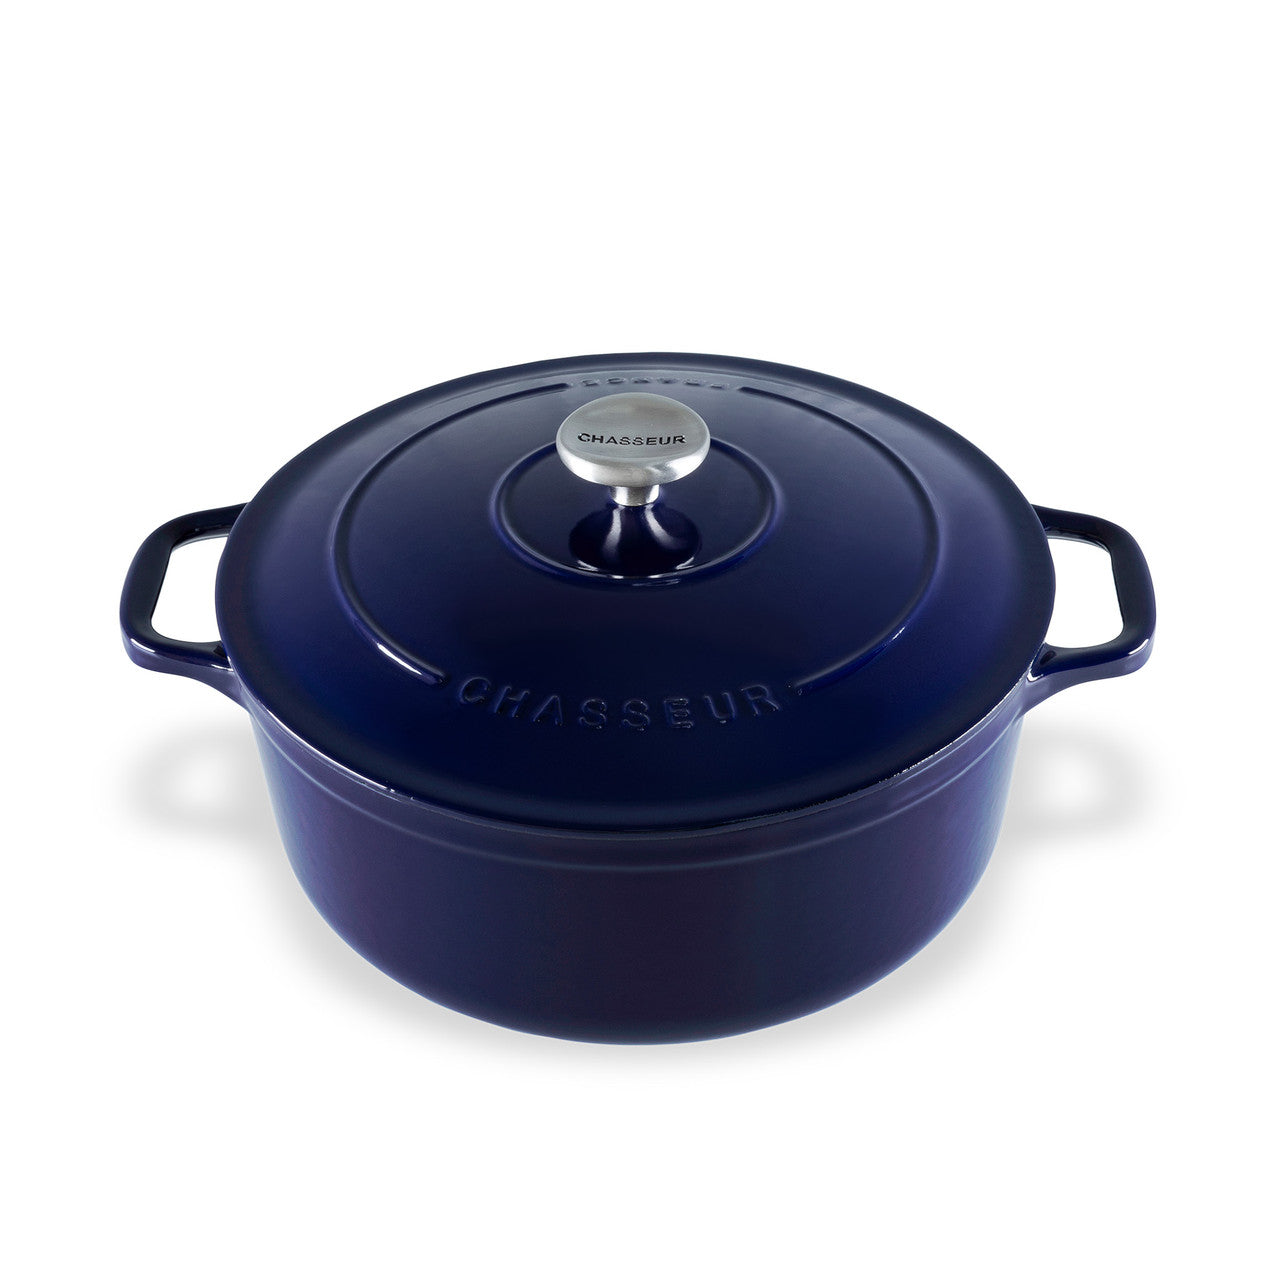 Chasseur Round French Oven 28cm 6.1L French Blue